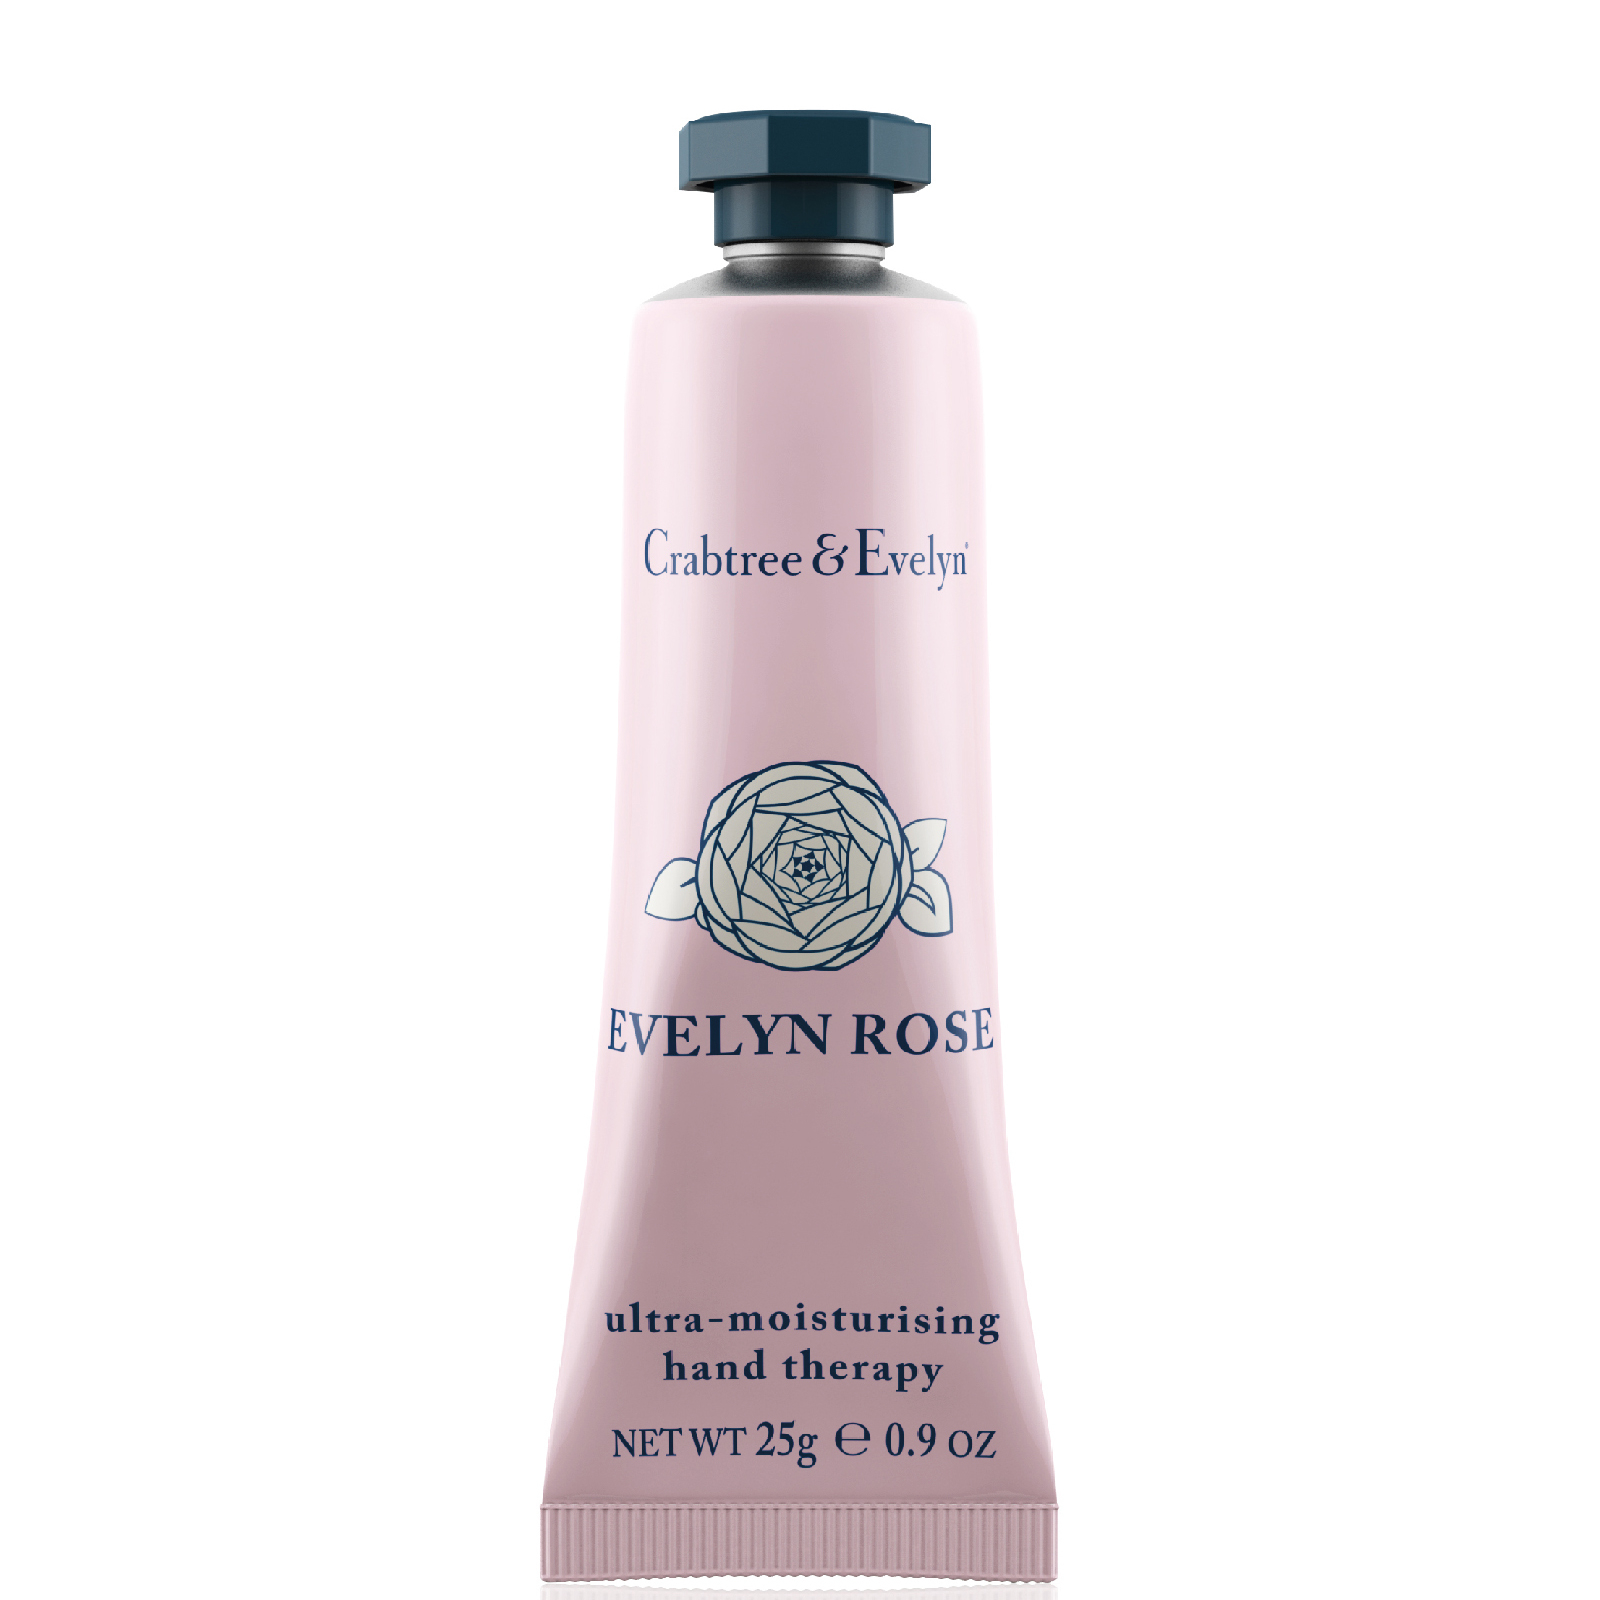 Evelyn Rose Hand Therapy de Crabtree & Evelyn 25 g